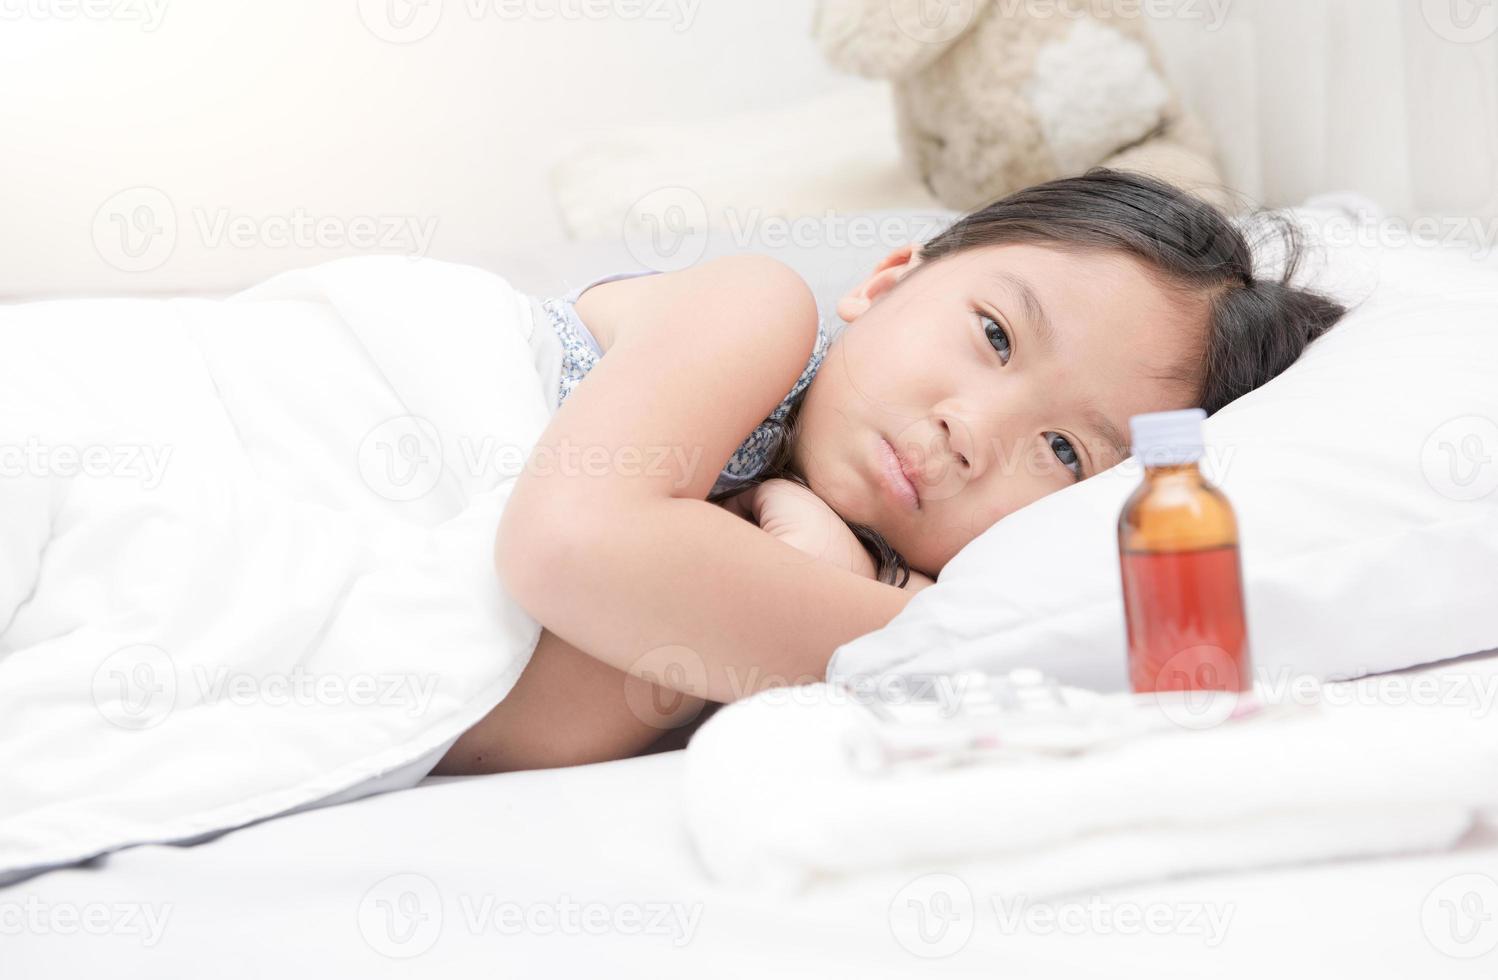 sick girl lying in bed and medicine syrup photo